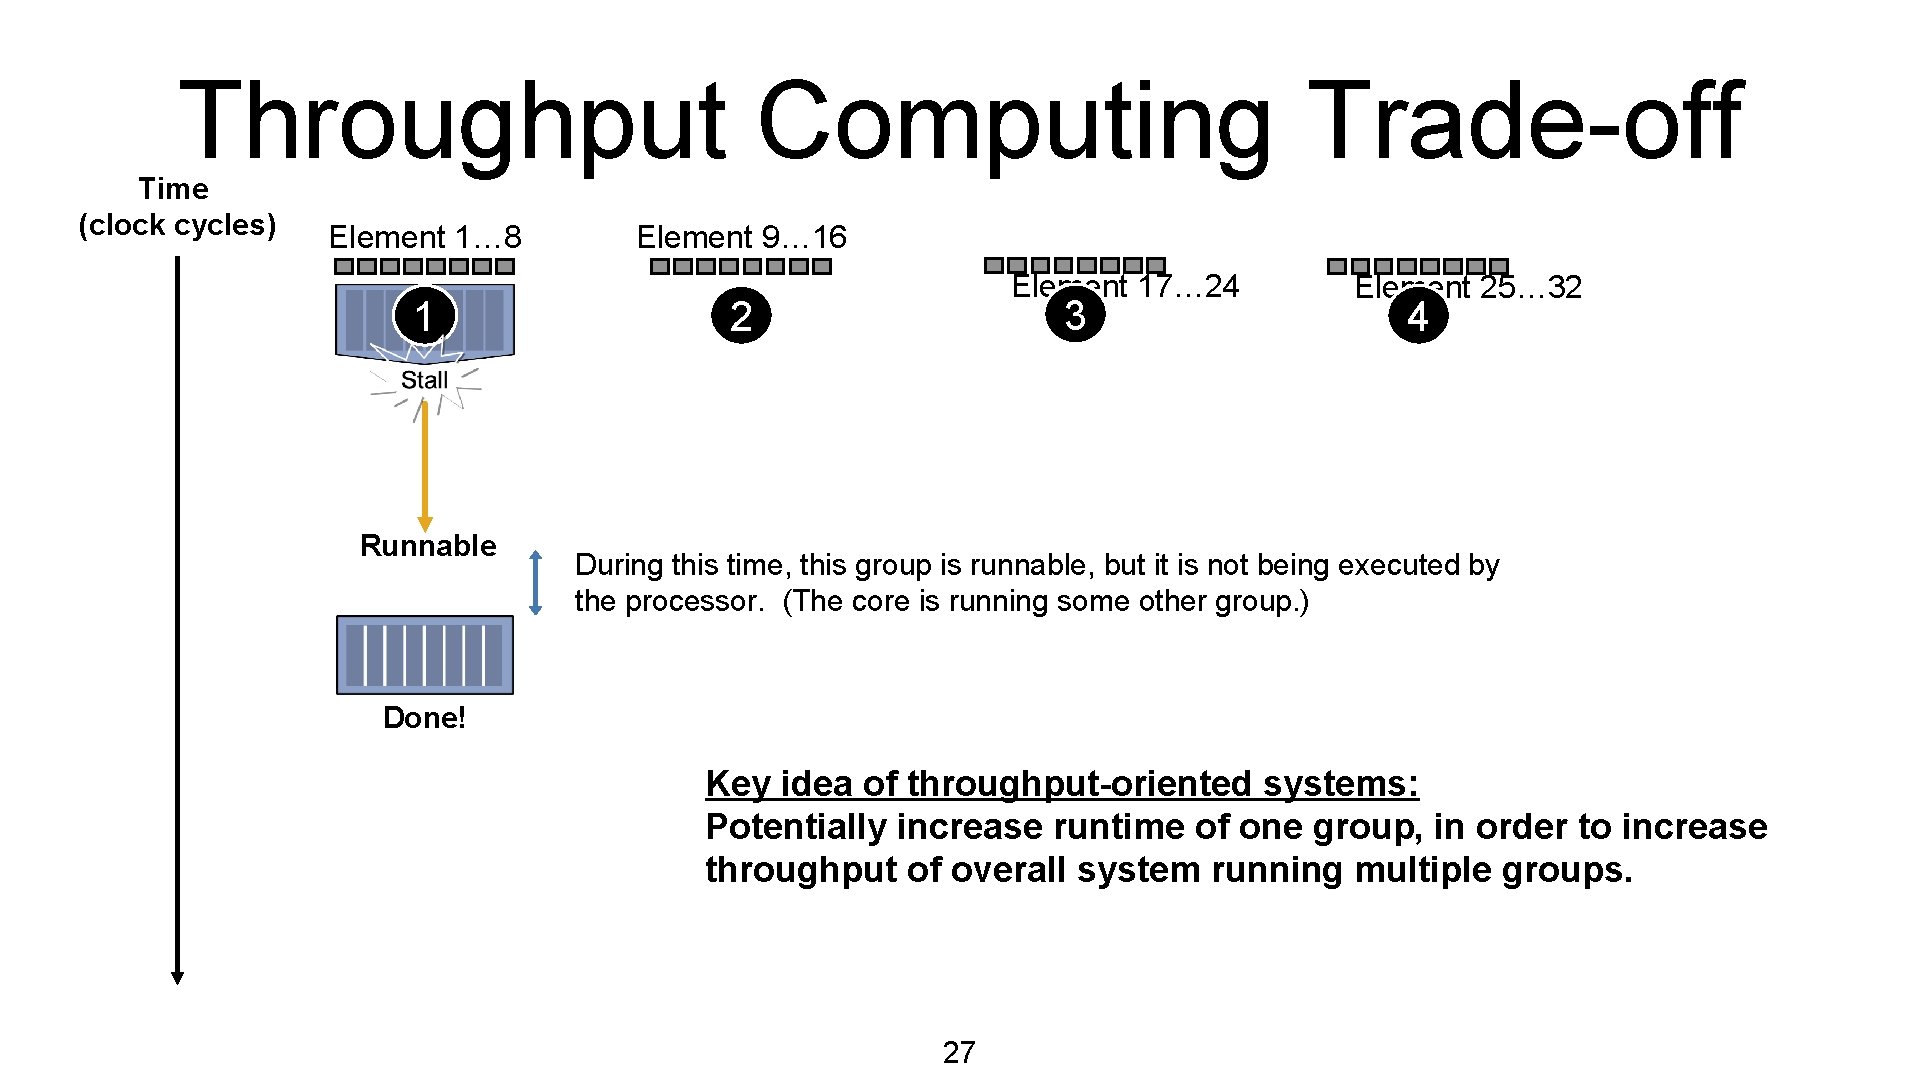 Throughput Computing Trade-off Time (clock cycles) Element 1… 8 1 Runnable Element 9… 16